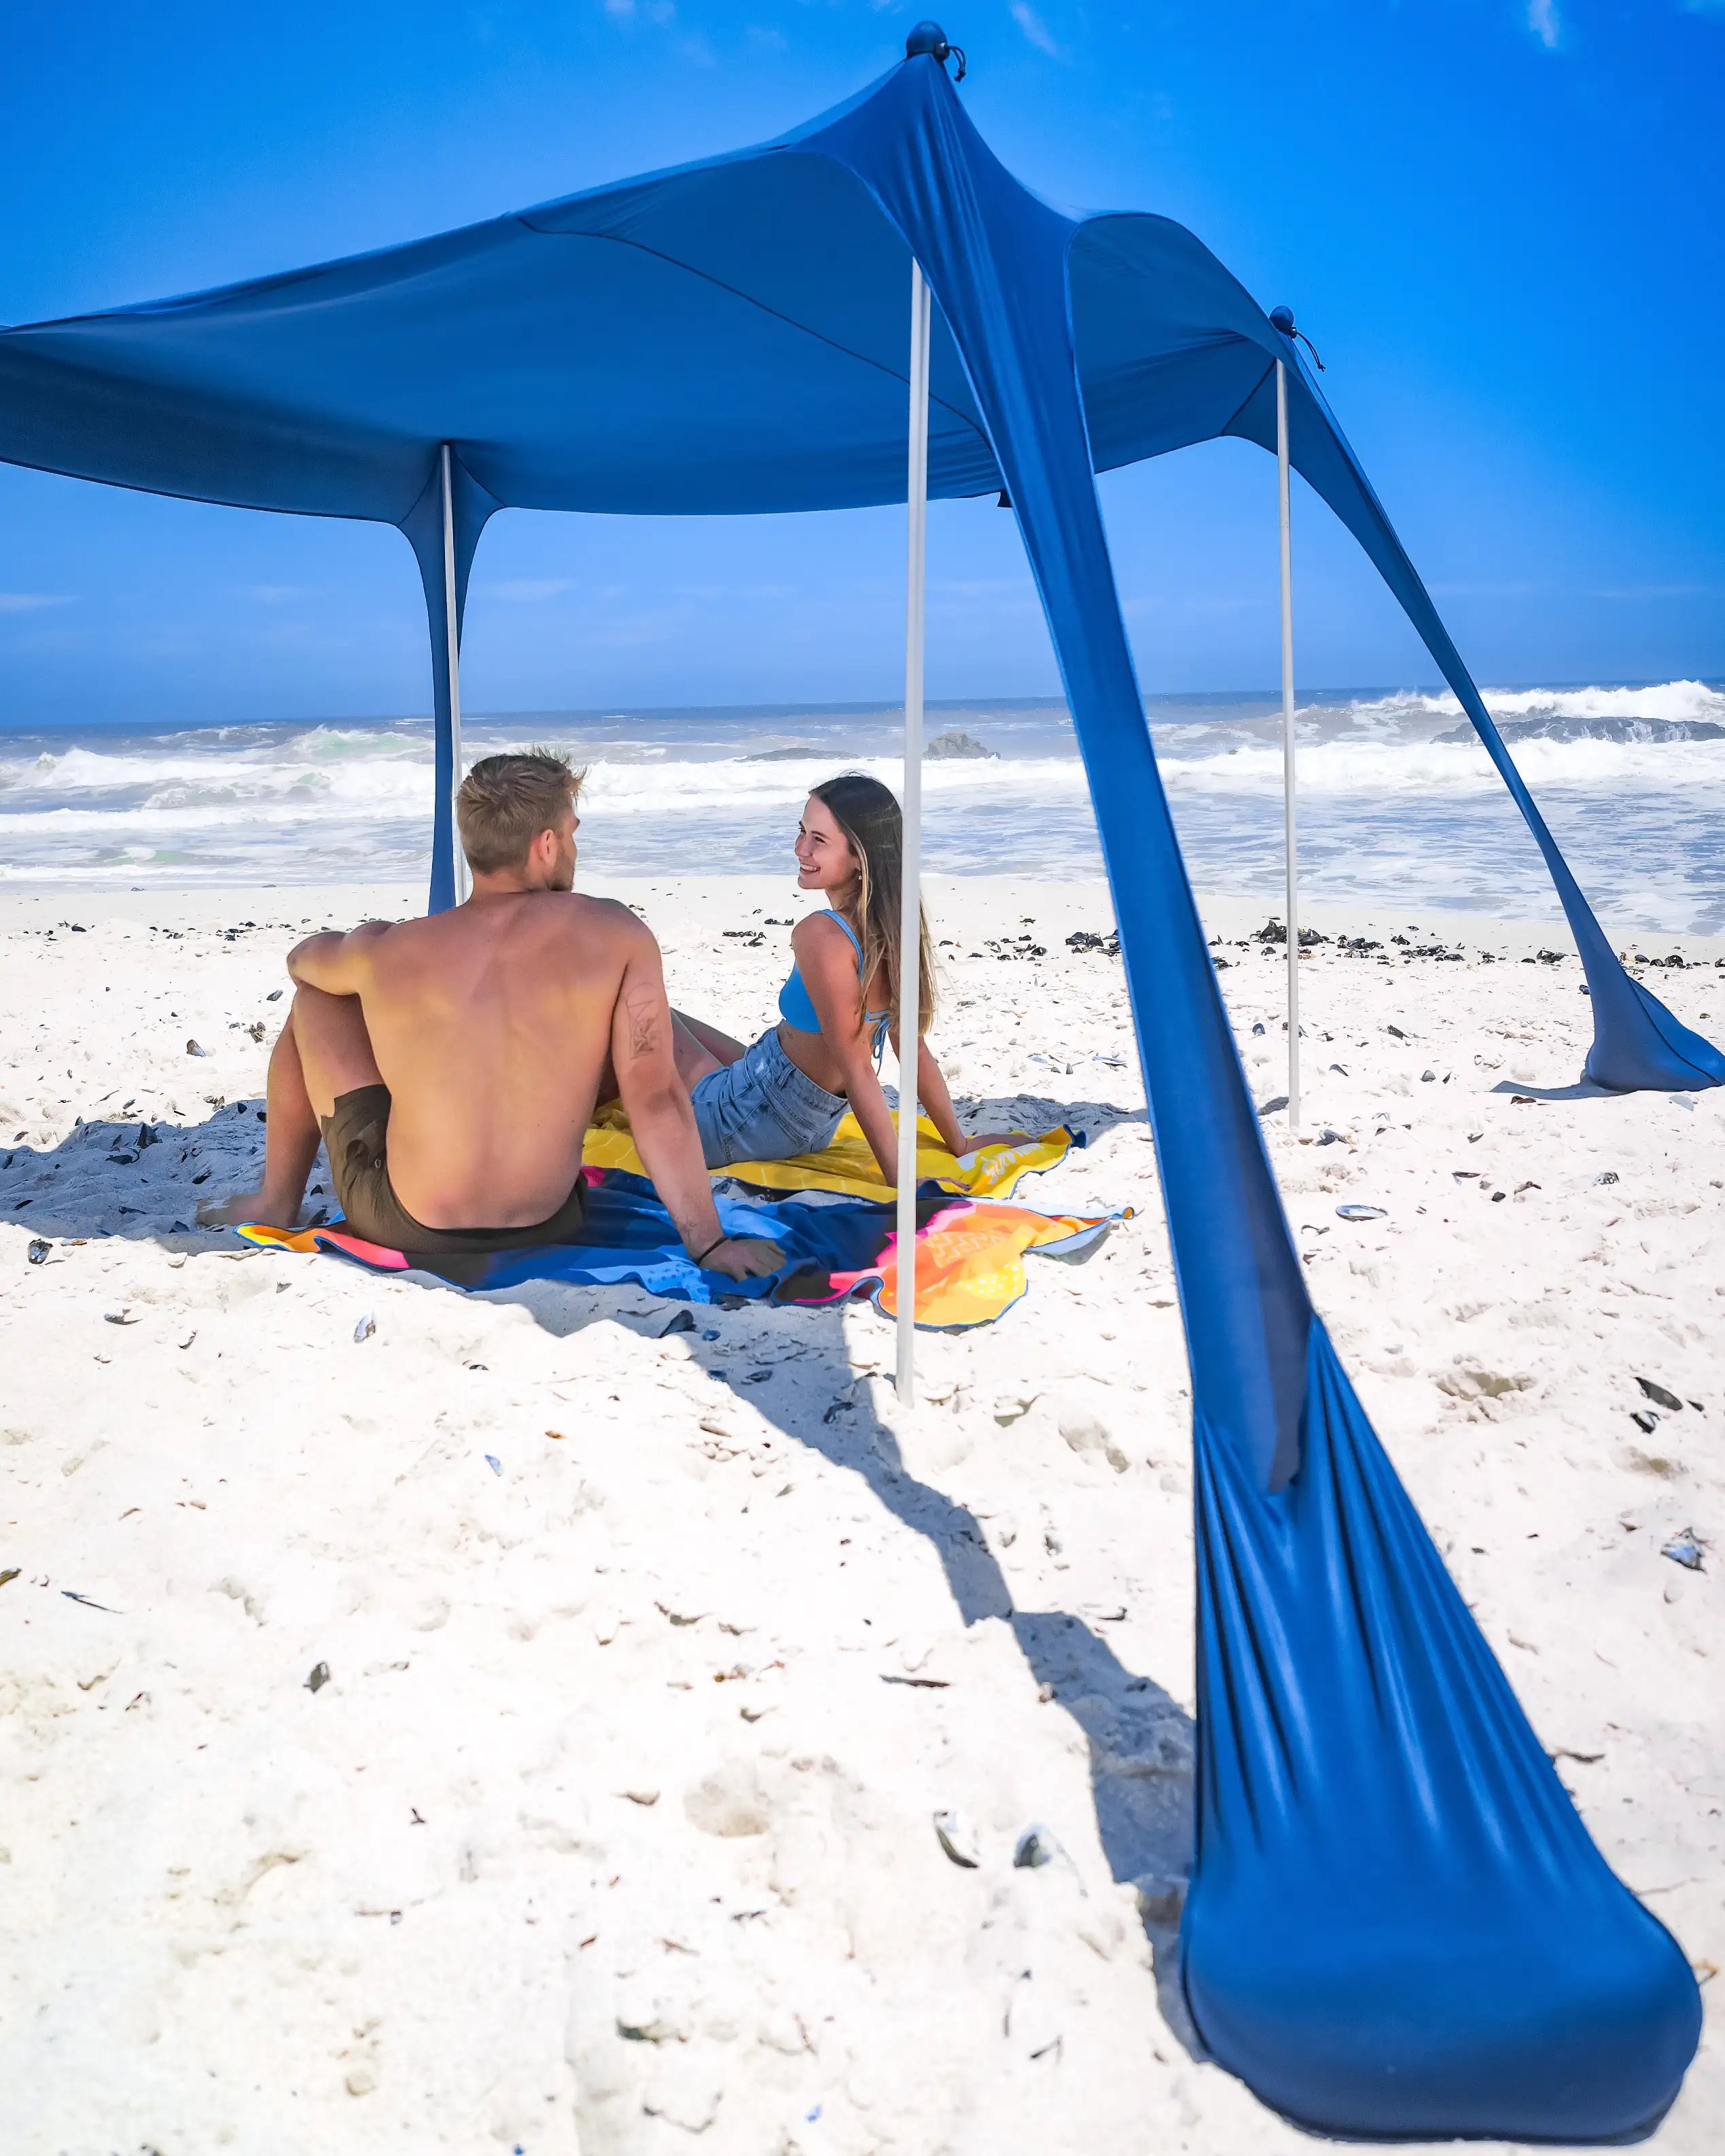 Block the Sun but Keep the Fun with Sun Ninja: The Coolest Sun Shade Out  There #MBPSummer20